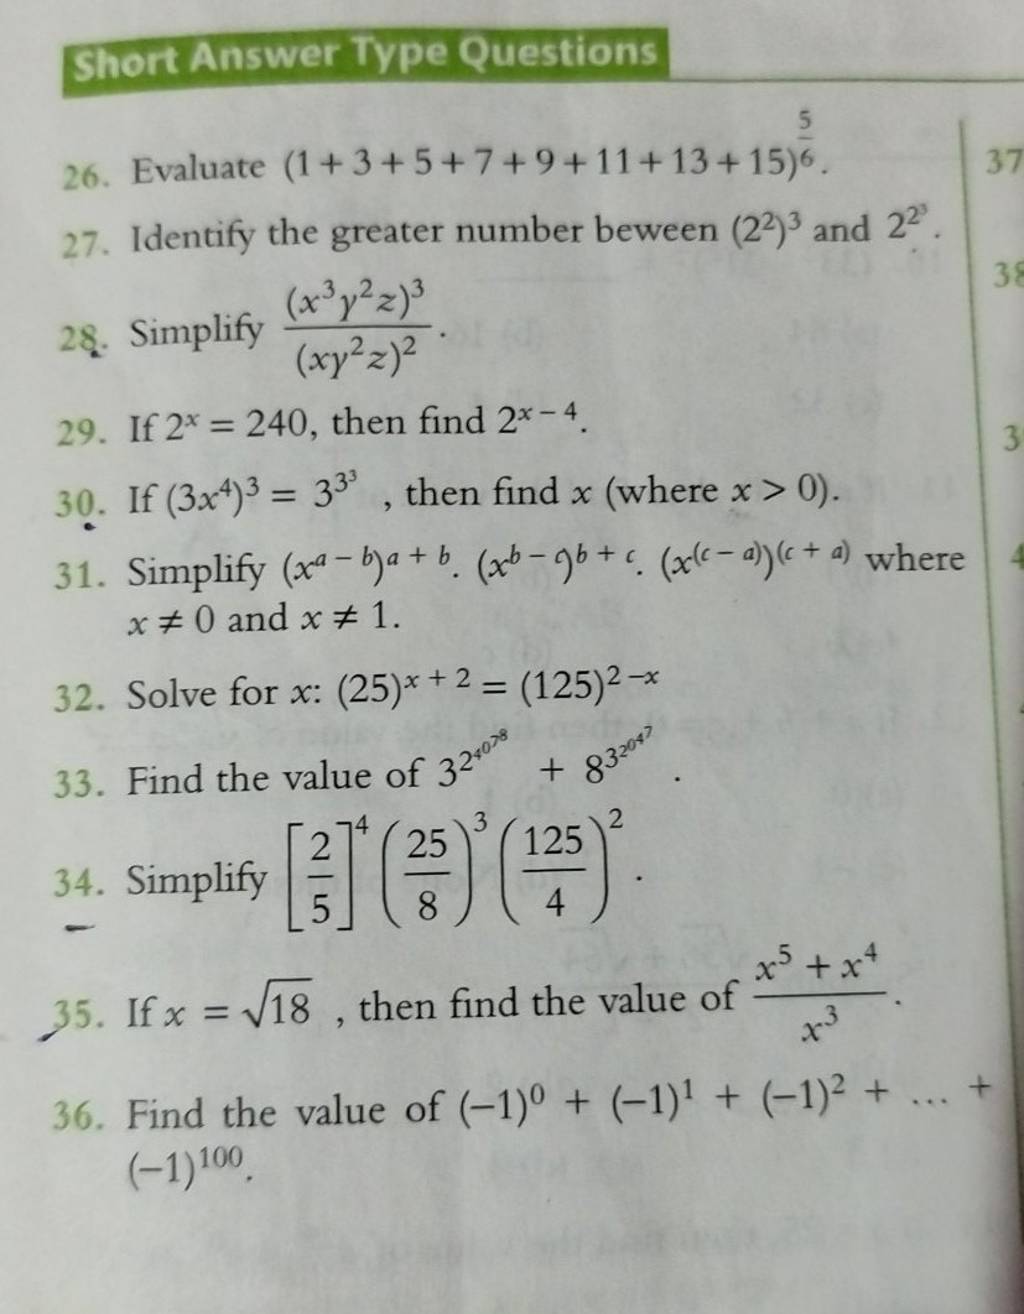 Short Answer Type Questions
26. Evaluate (1+3+5+7+9+11+13+15)65​.
27. 